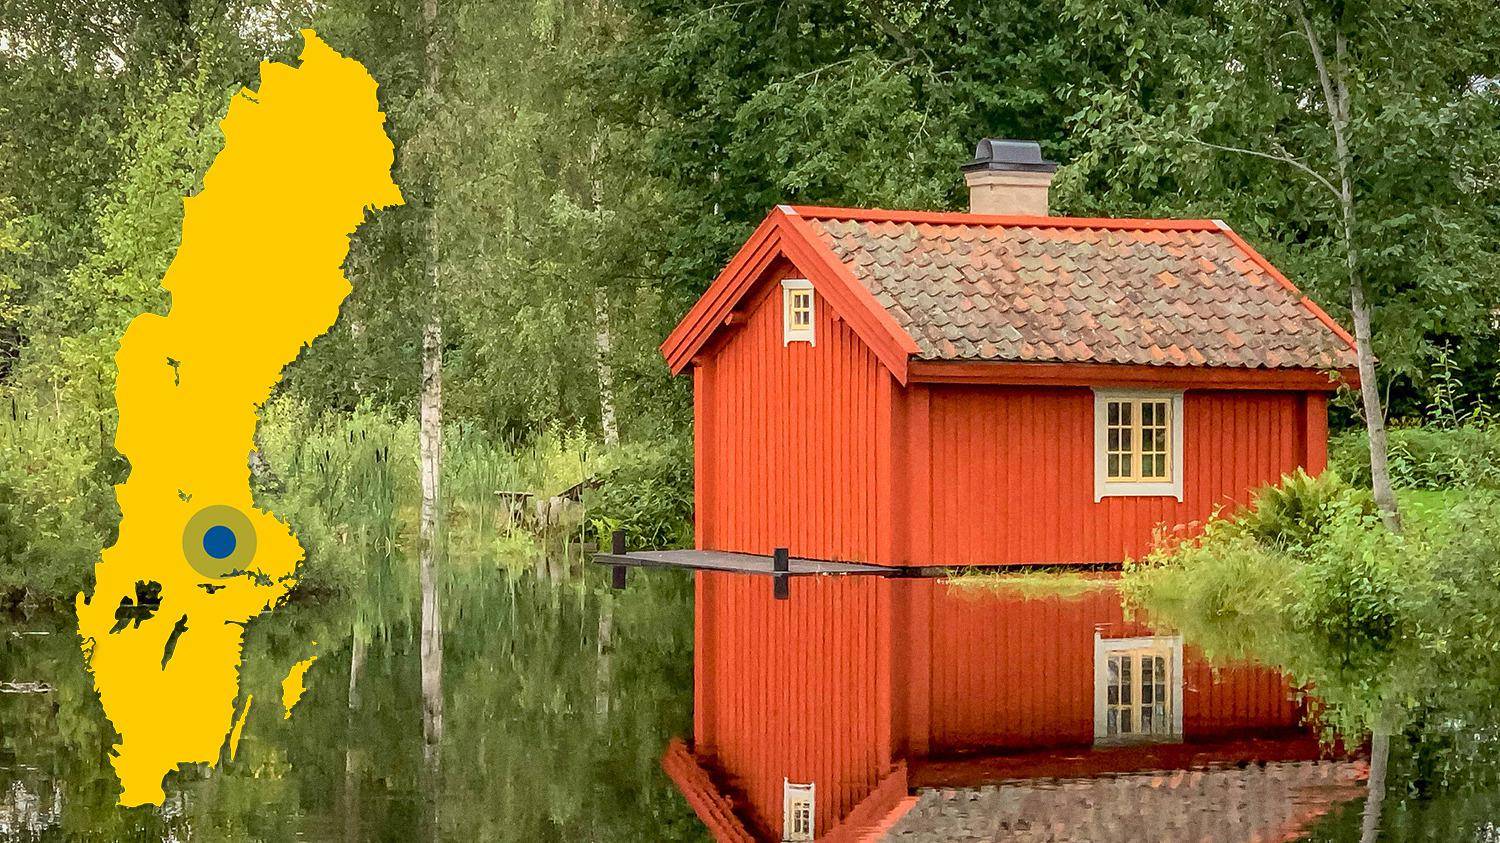 A red wooden house with a red tile roof stands at the edge of the water. The house is reflected in the water. The picture shows a yellow map of Sweden with a marker that shows the location of Norberg.